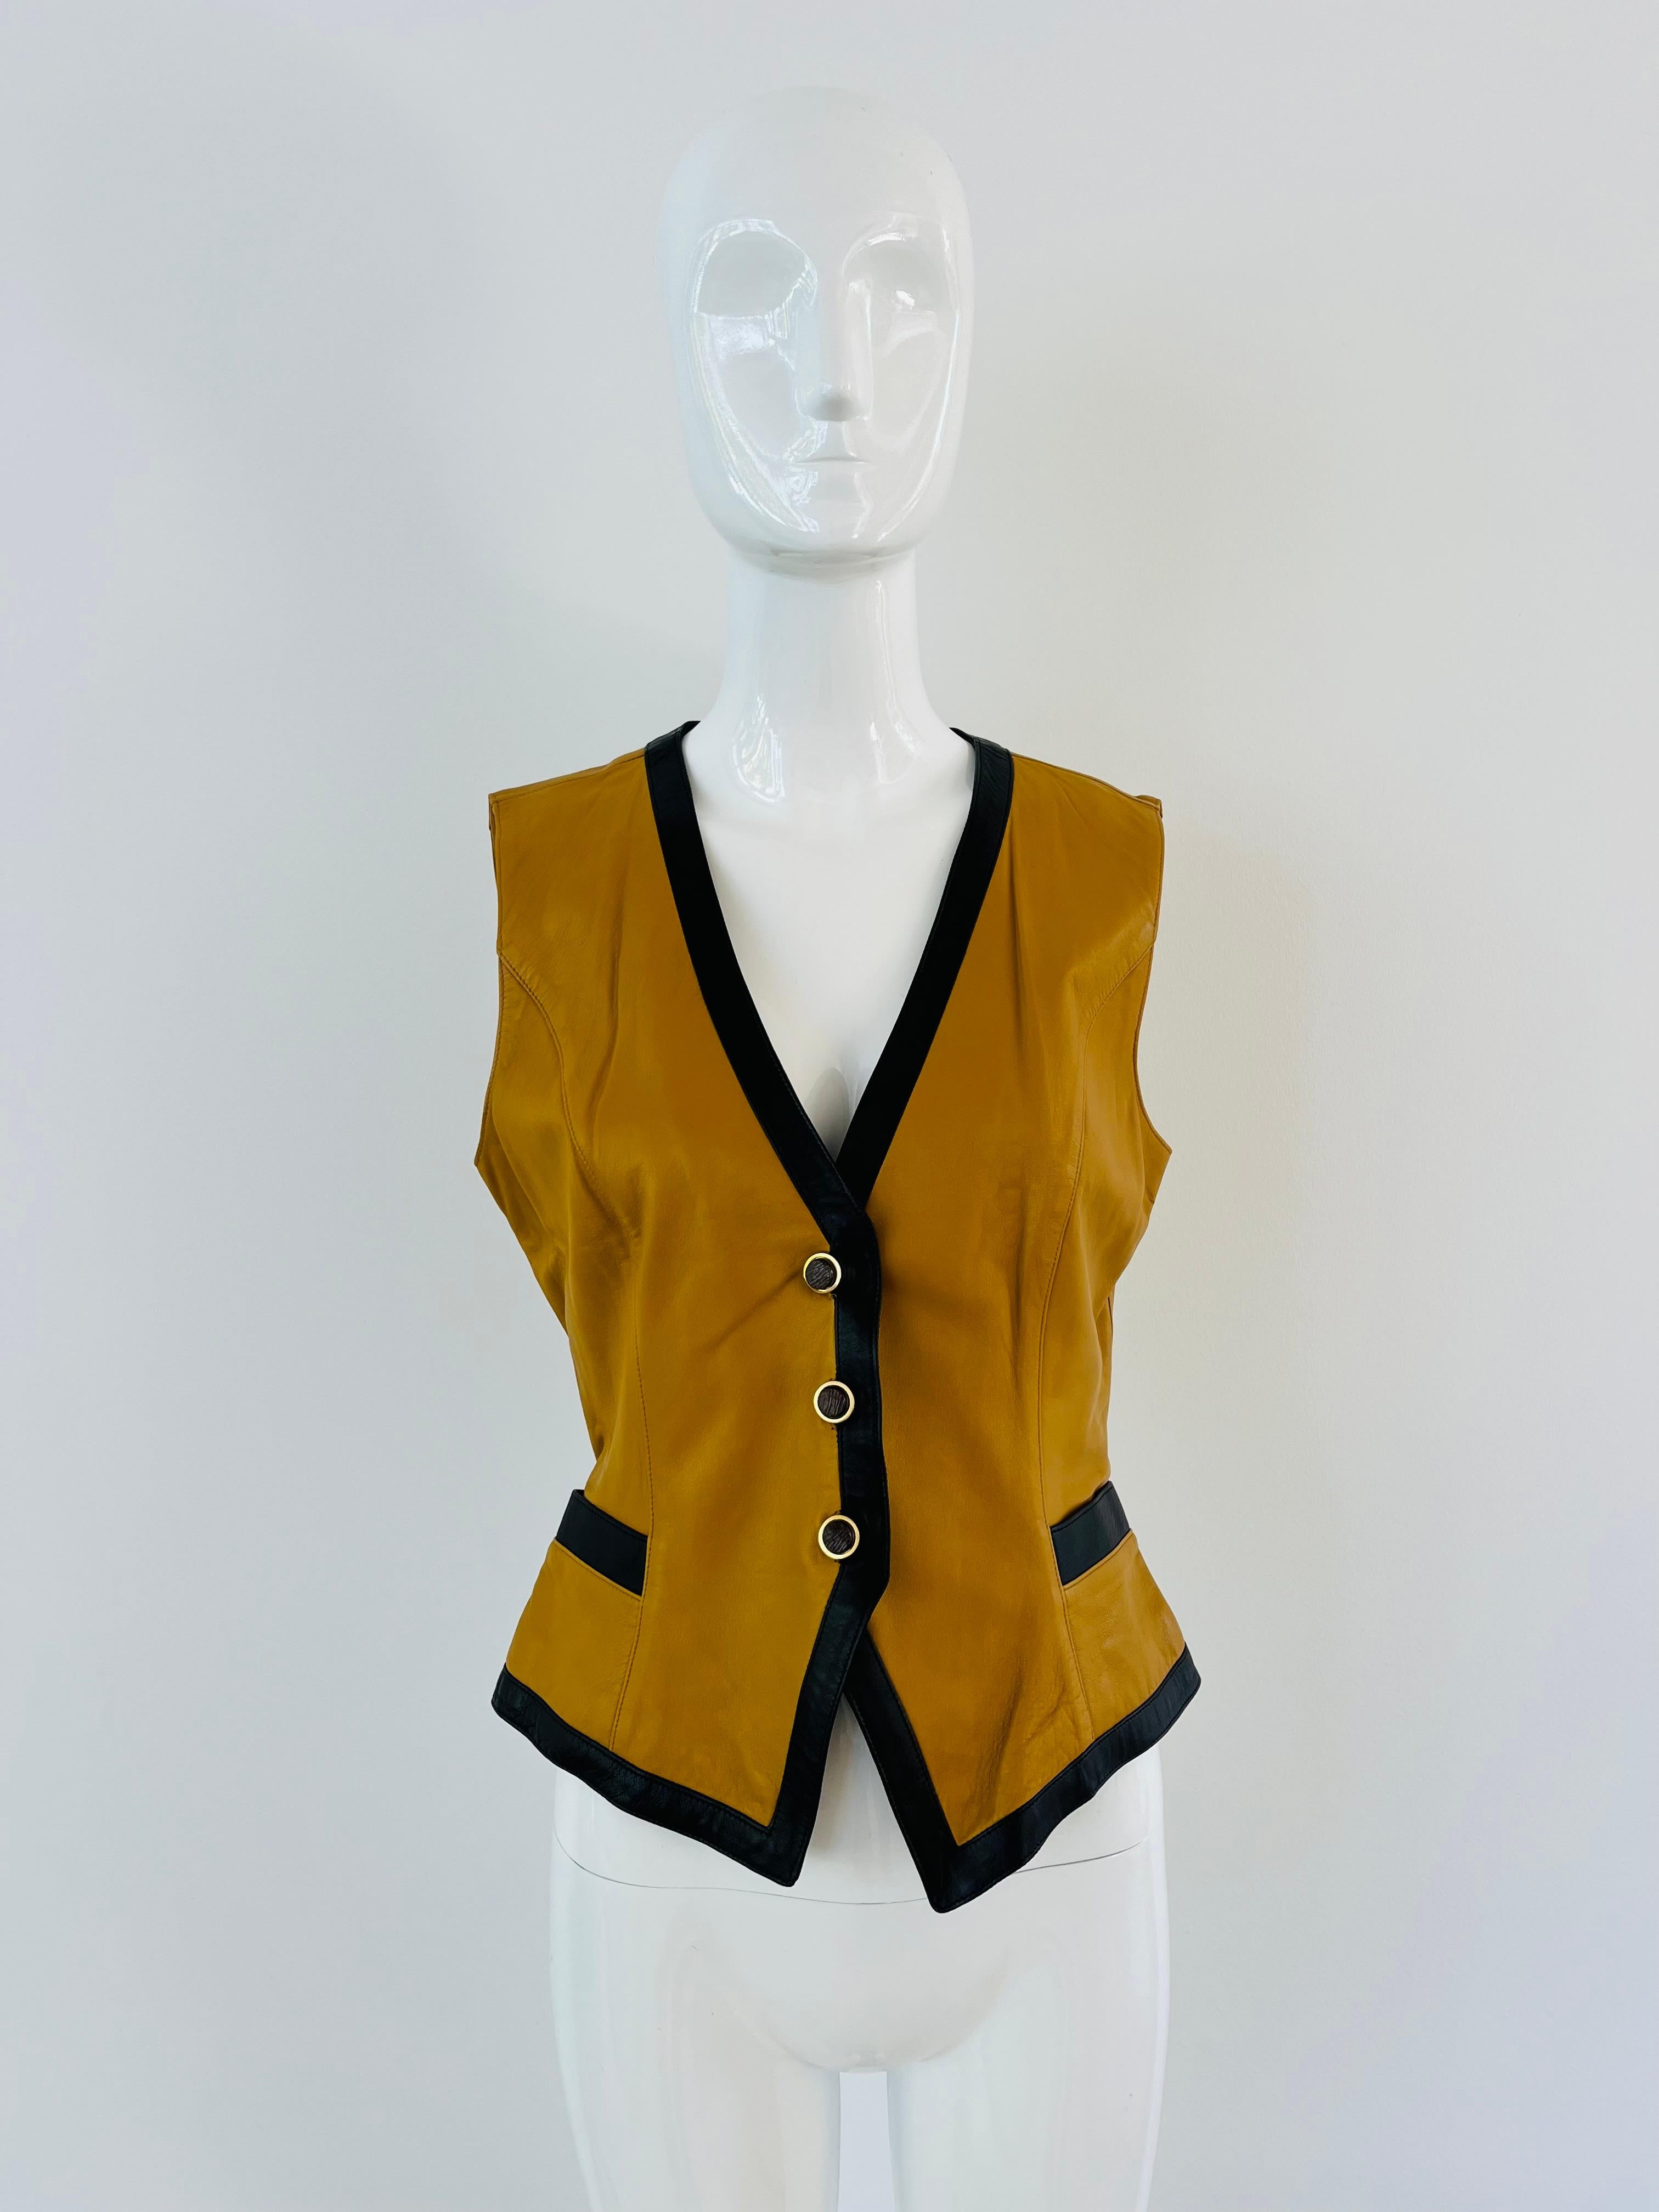 1990s Vintage Emanuel Ungaro mustard yellow/brown and black trim soft leather vest, with wood and gold hardware buttons. Two front pockets with contrasting trim. Fabric label is missing but leather and lined in acetate. Marked as a size 8 and